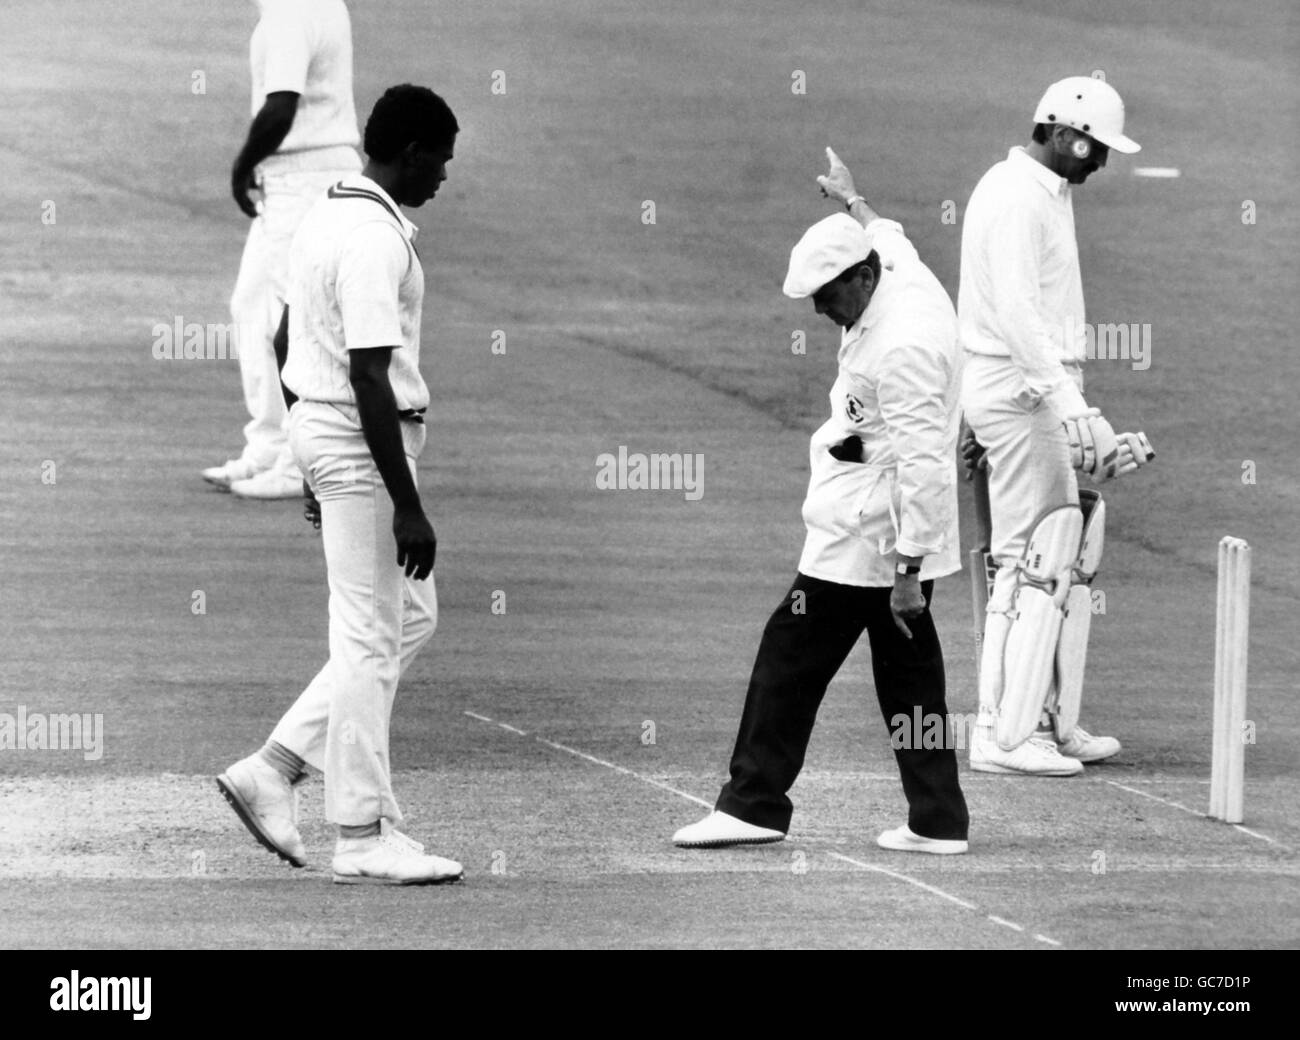 Cricket - Texaco Trophy 1988 (3rd ODI) - Second Day - England v West Indies - Lord's Cricket Ground. Umpire Dickis Bird warns West Indies bowler Ian Bishop for stepping past the crease and indicates a no ball Stock Photo